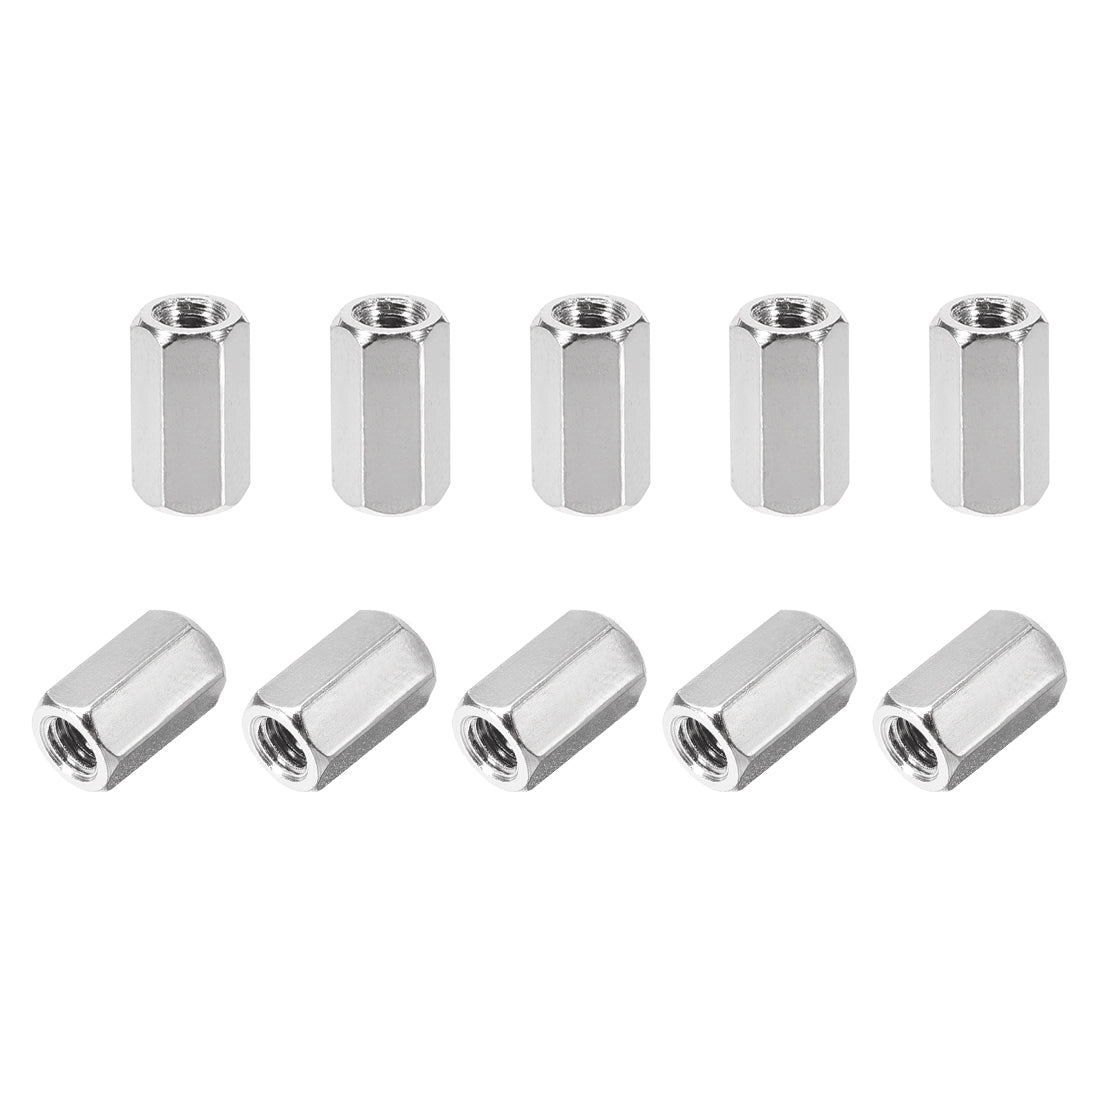 Uxcell Uxcell M4 x 40mm Female to Female Hex Nickel Plated Spacer Standoff 10pcs